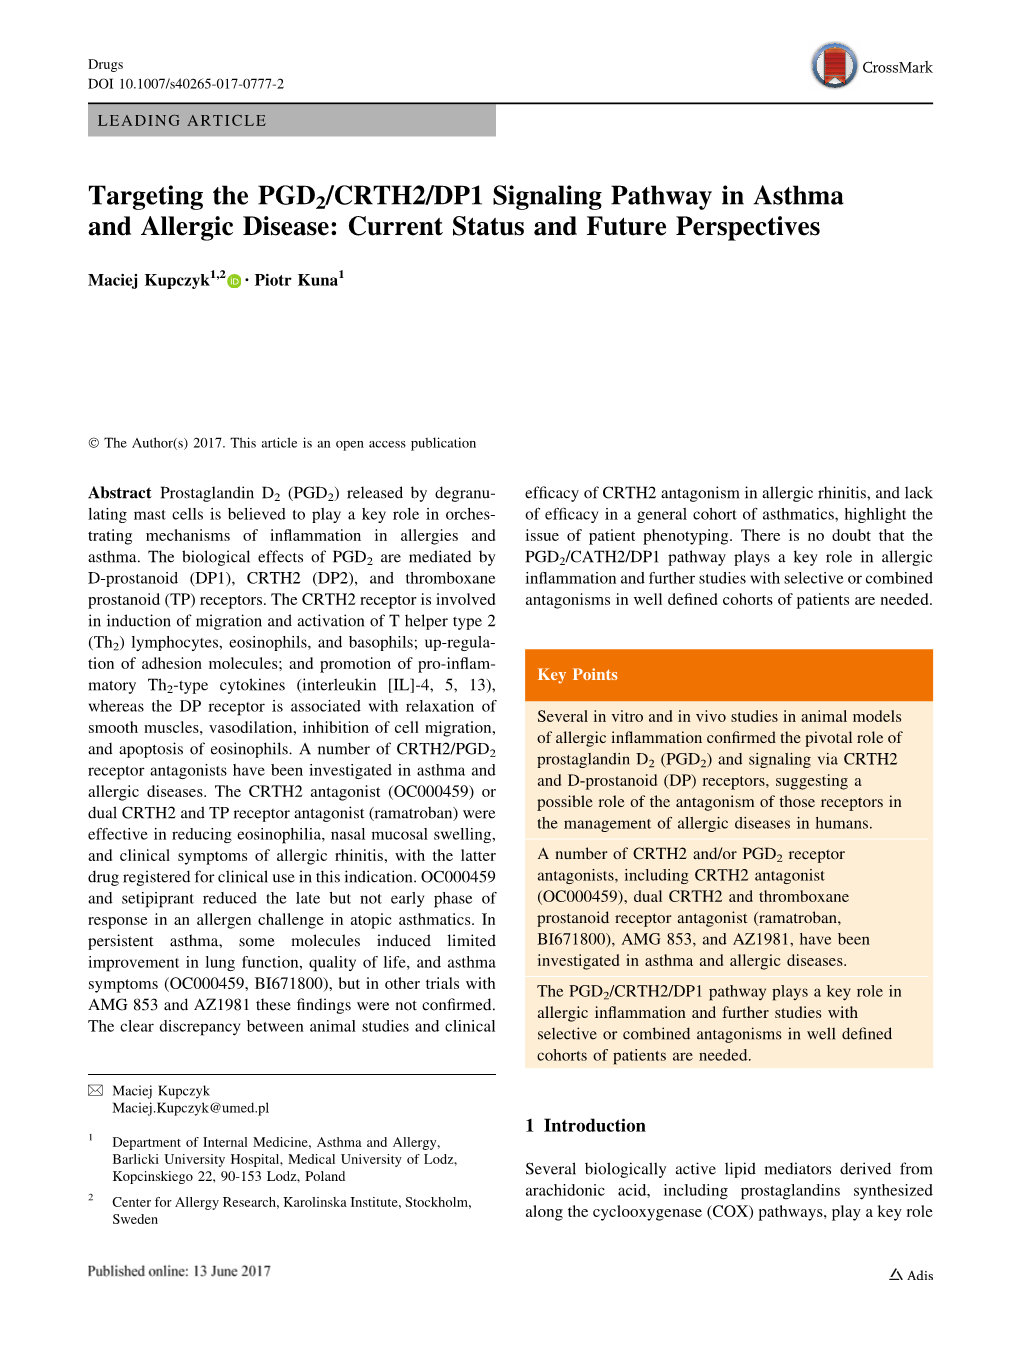 Targeting the PGD2/CRTH2/DP1 Signaling Pathway in Asthma and Allergic Disease: Current Status and Future Perspectives